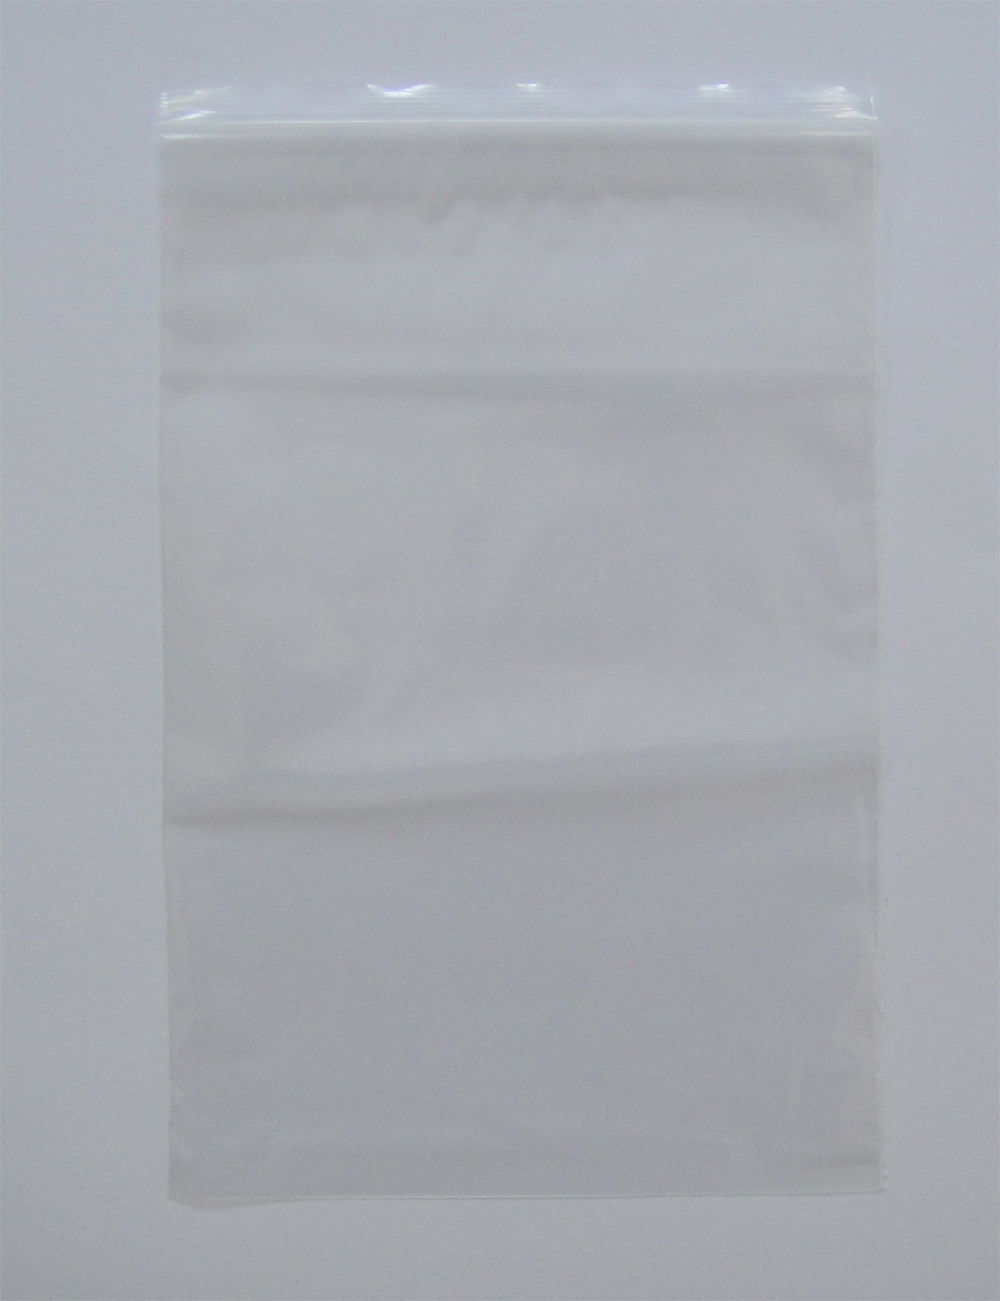 All Sizes Grip Lock Bags Self Sealable Reseal Grip Poly Plastic Clear Zip Seal 